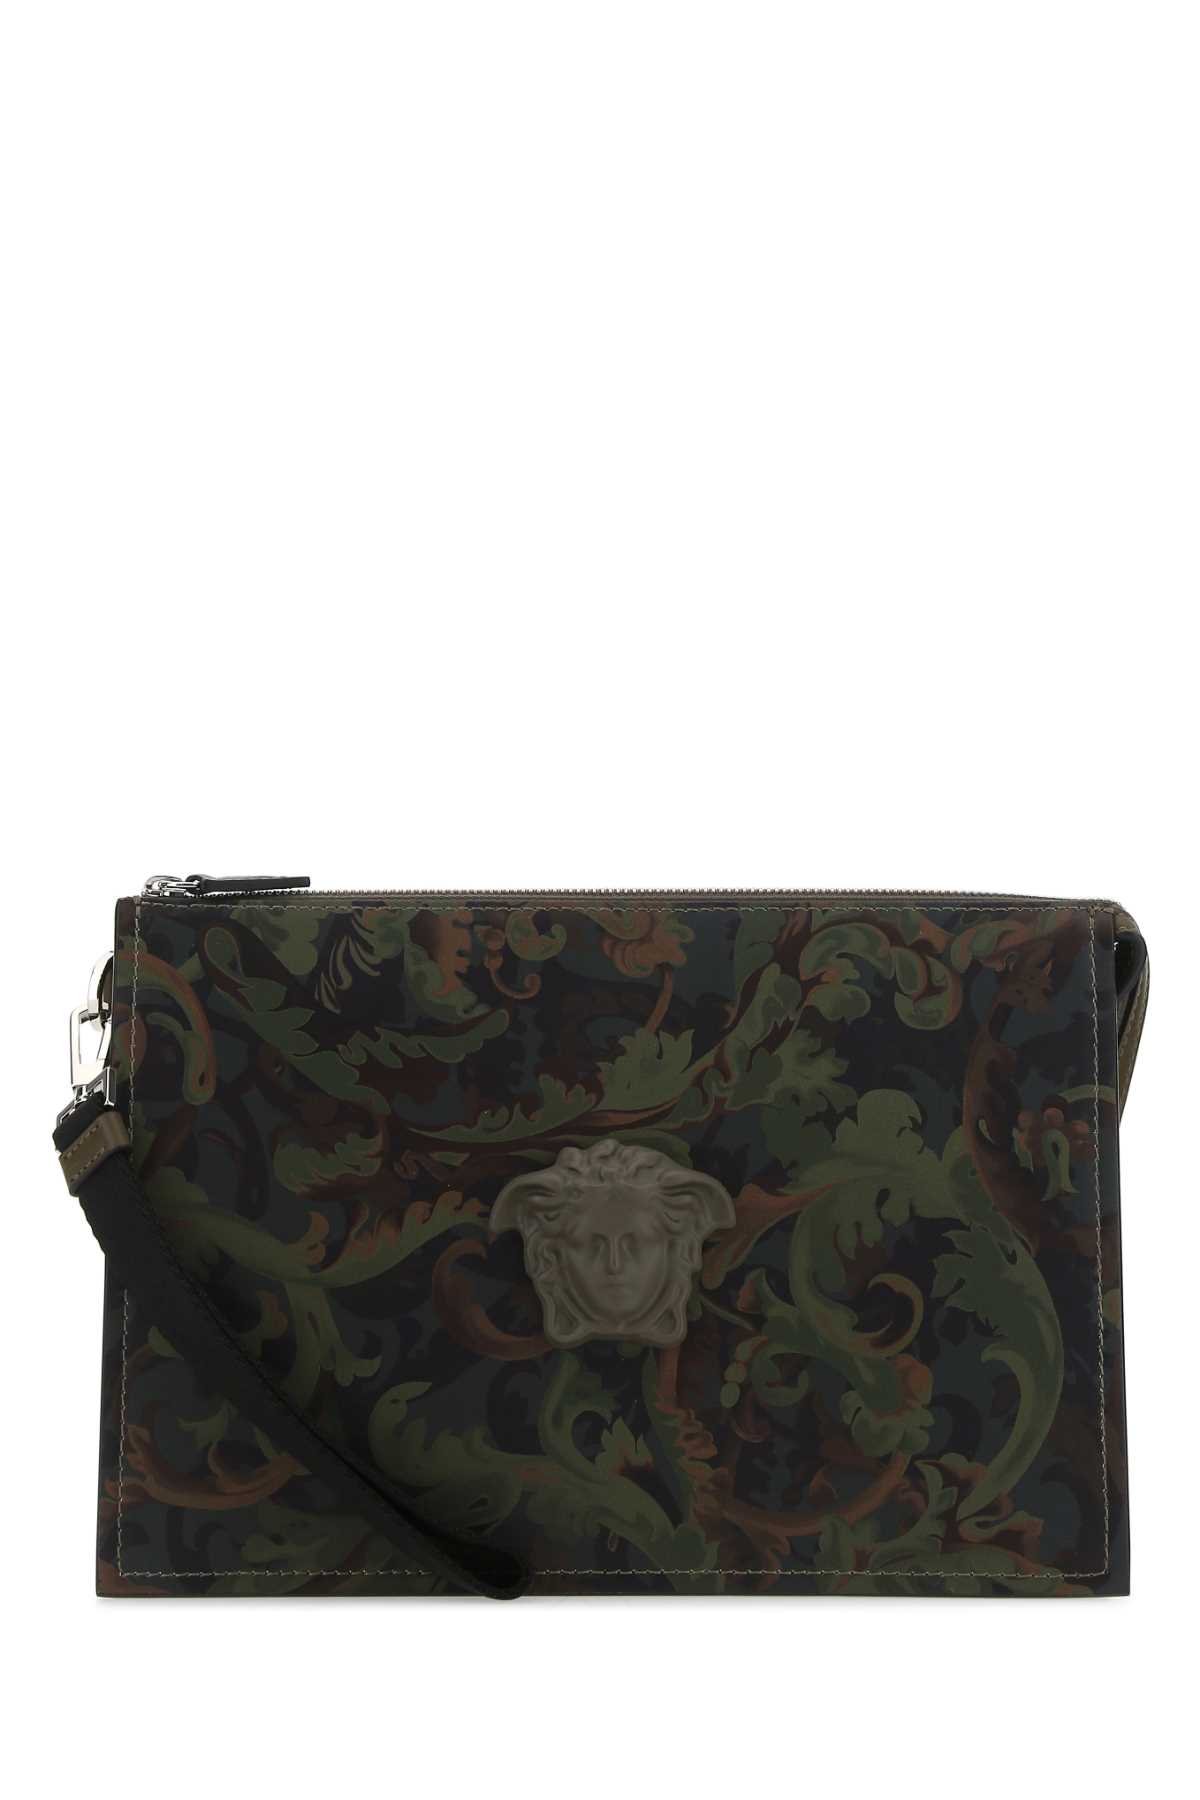 Versace Printed Leather Clutch